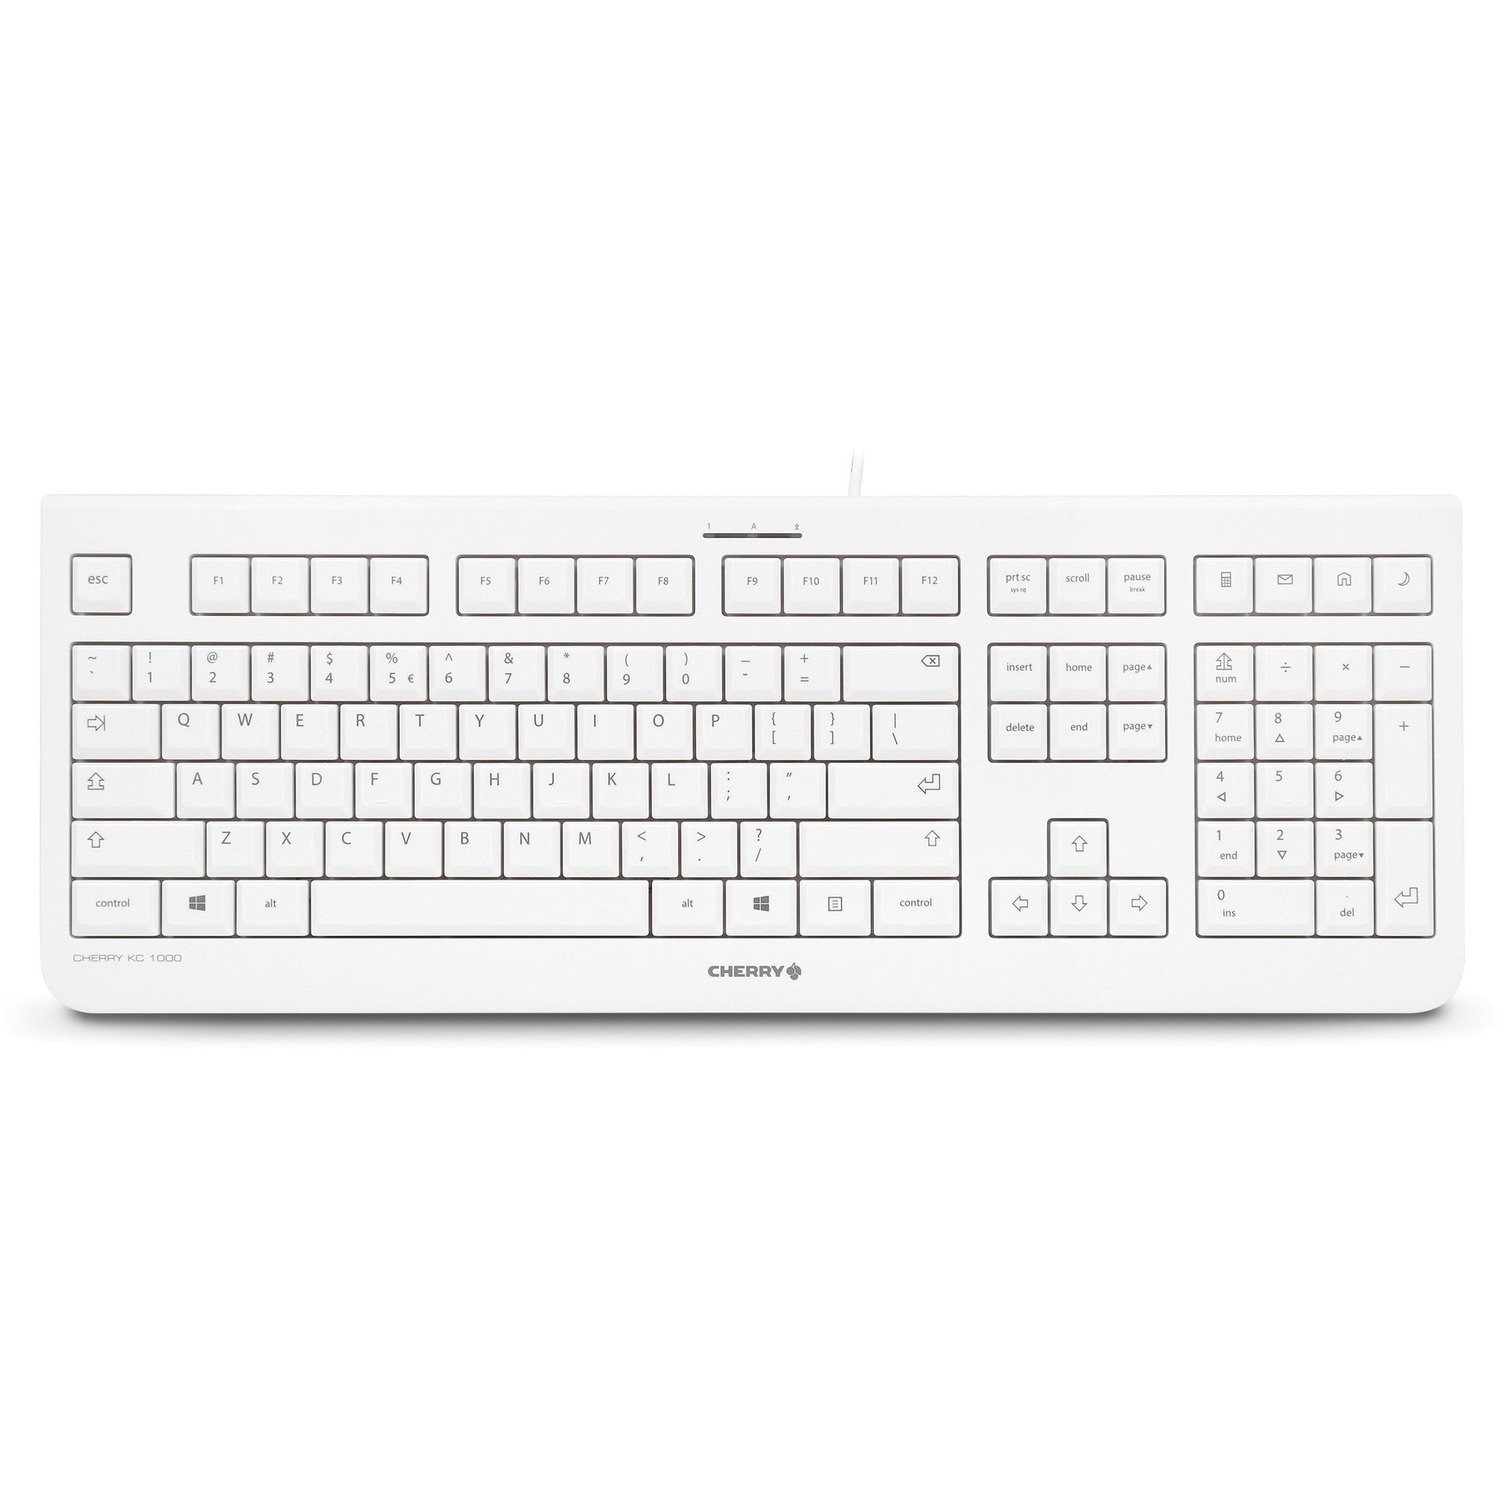 CHERRY KC 1000 Keyboard - Cable Connectivity - USB Interface - English (US) - Light Grey